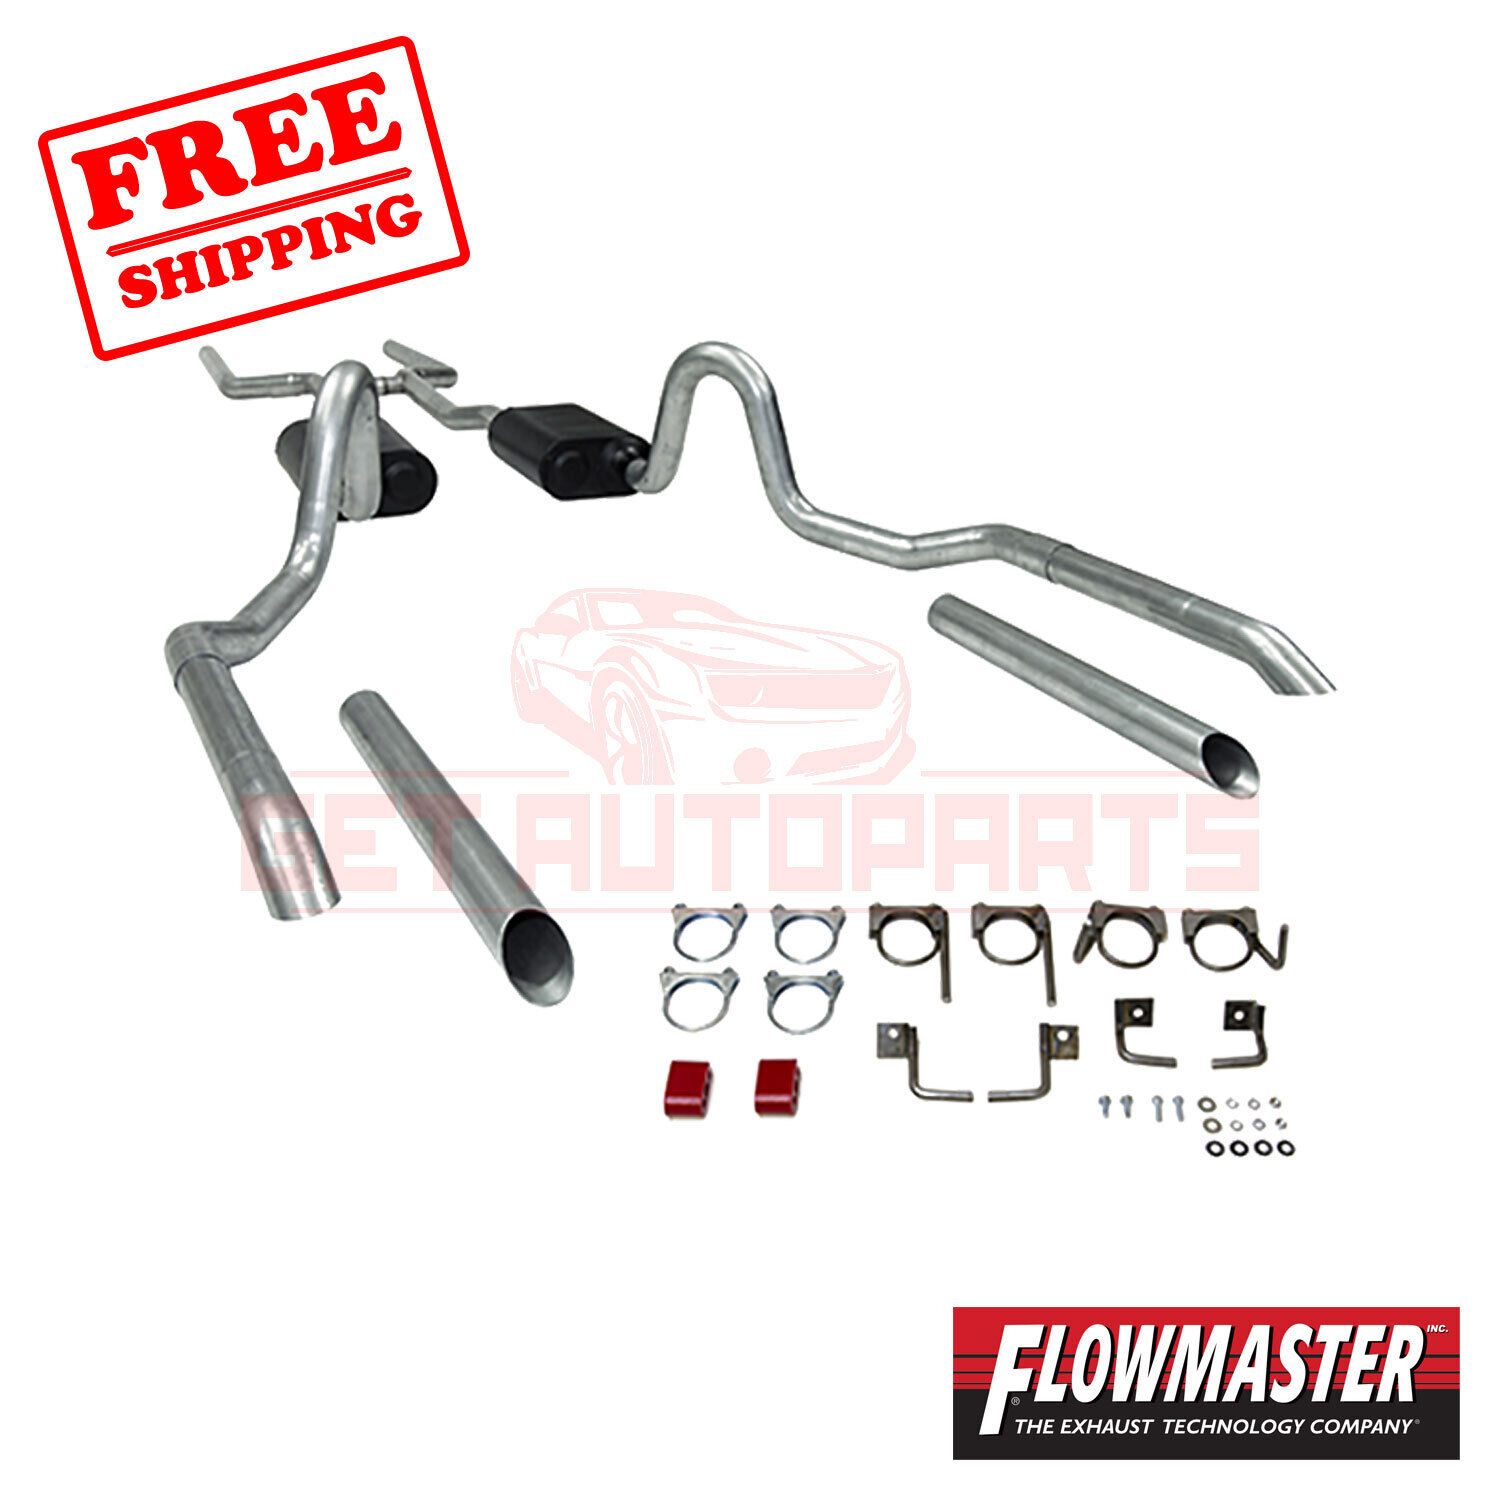 FlowMaster Exhaust System Kit for Buick GS 400 68-69